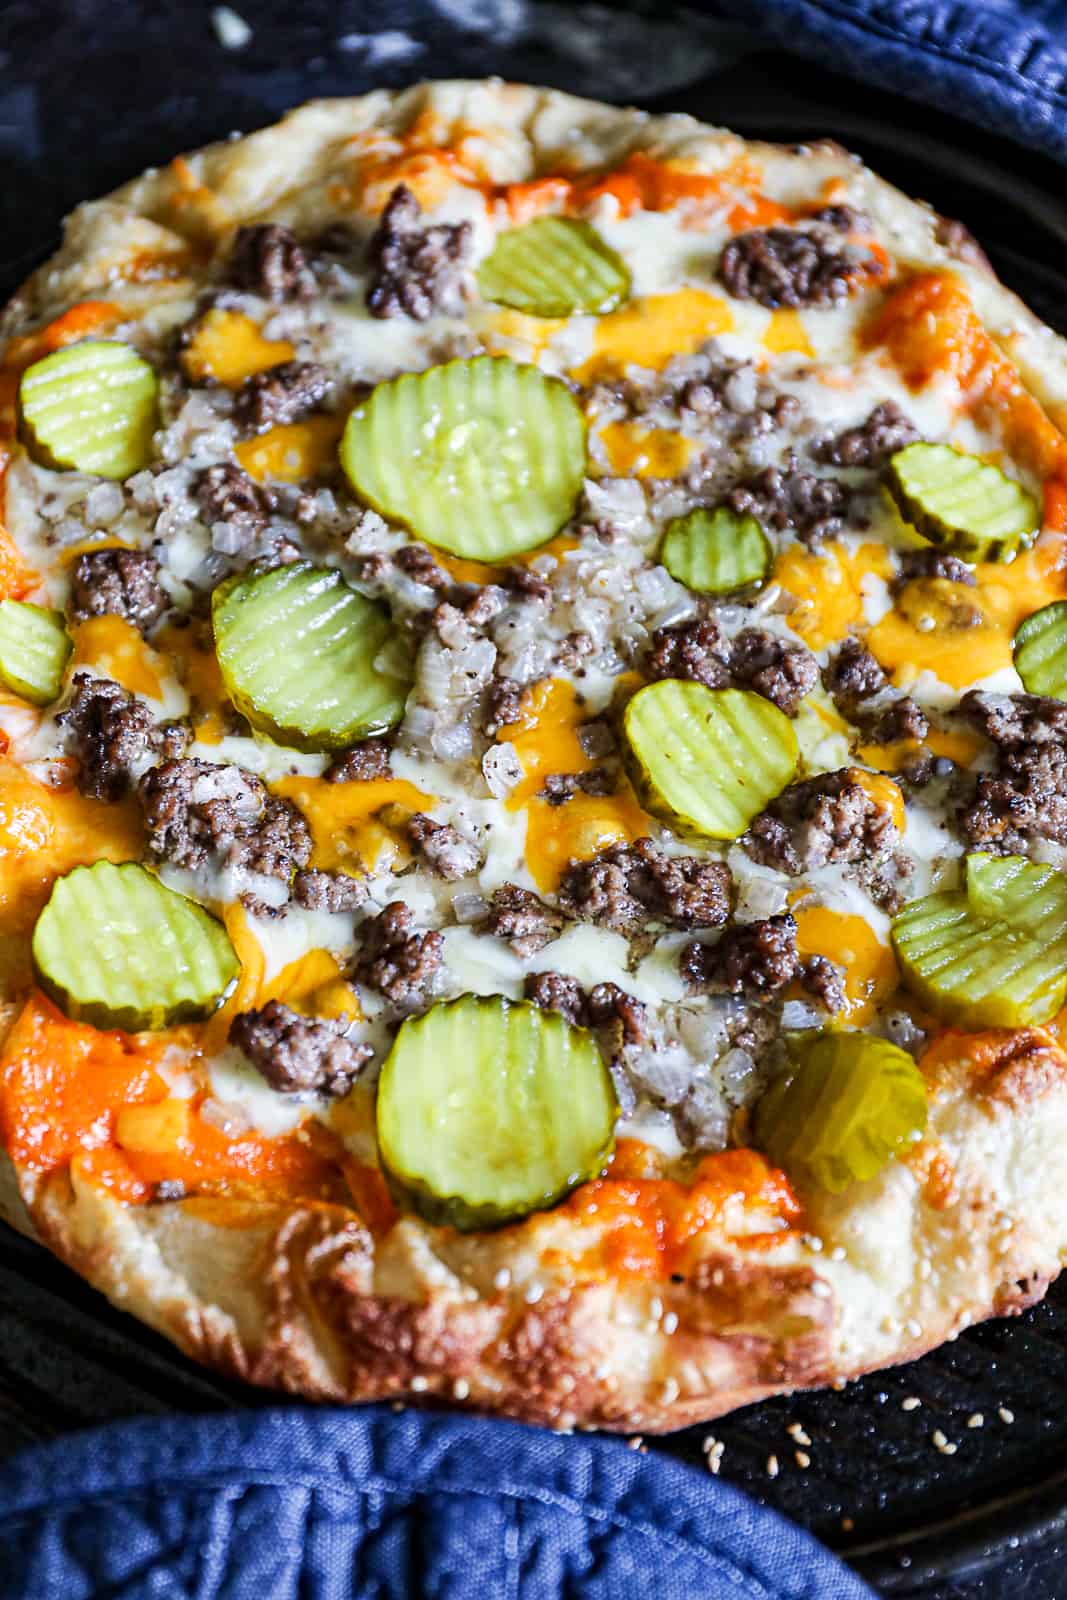 Cheeseburger pizza grilling recipe for Spring